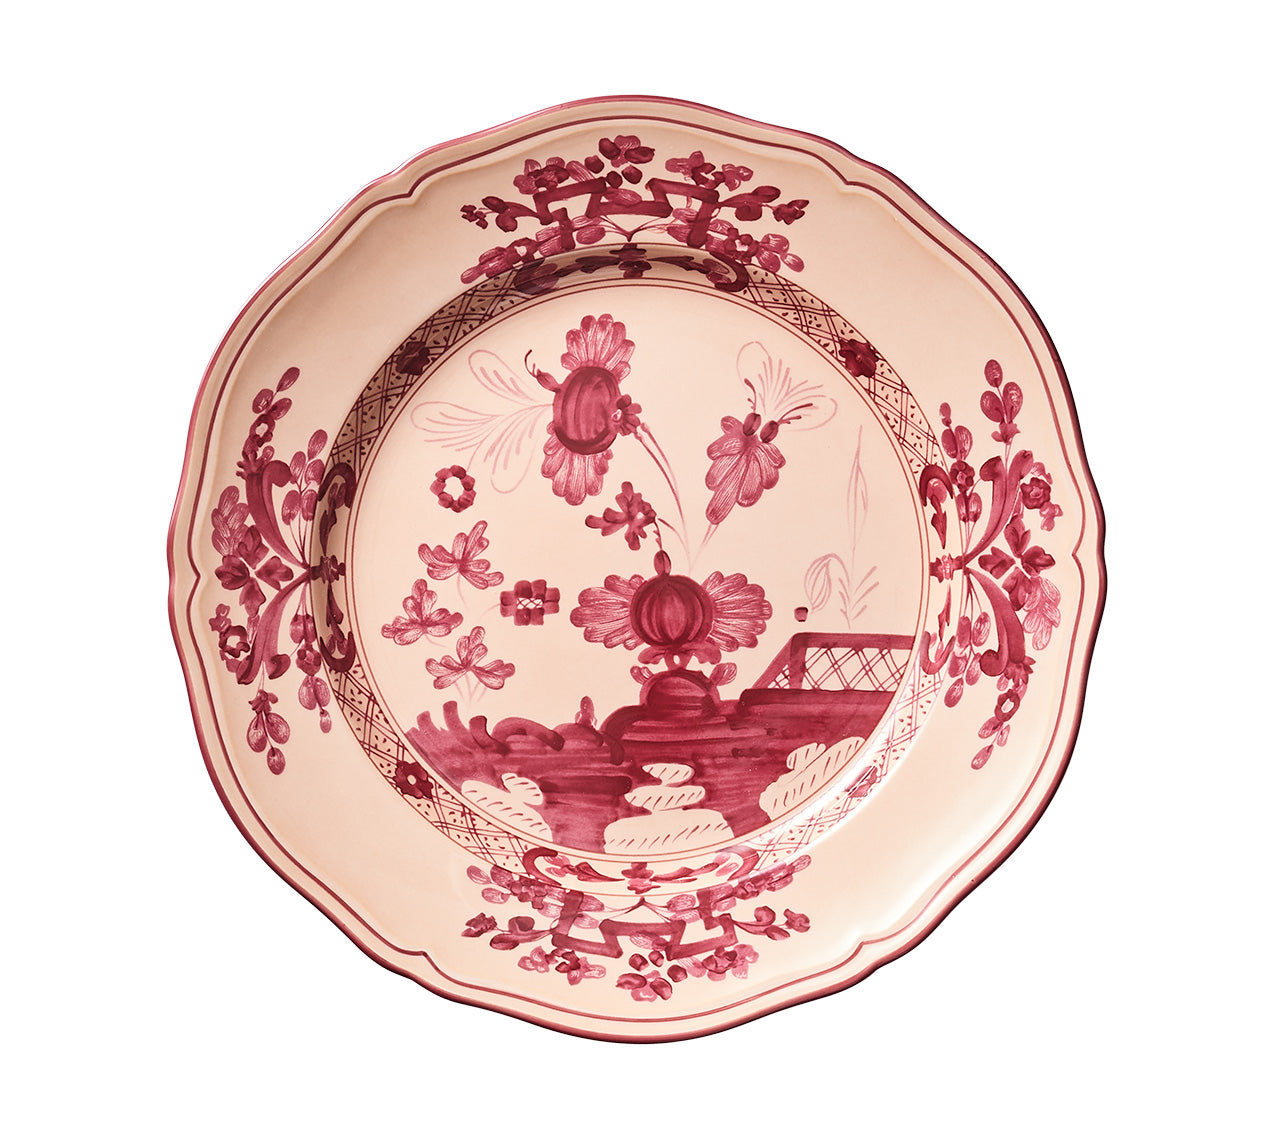 Stylized carnation in red on a porcelain Oriente Italiano Dinner Plate, Vermiglio